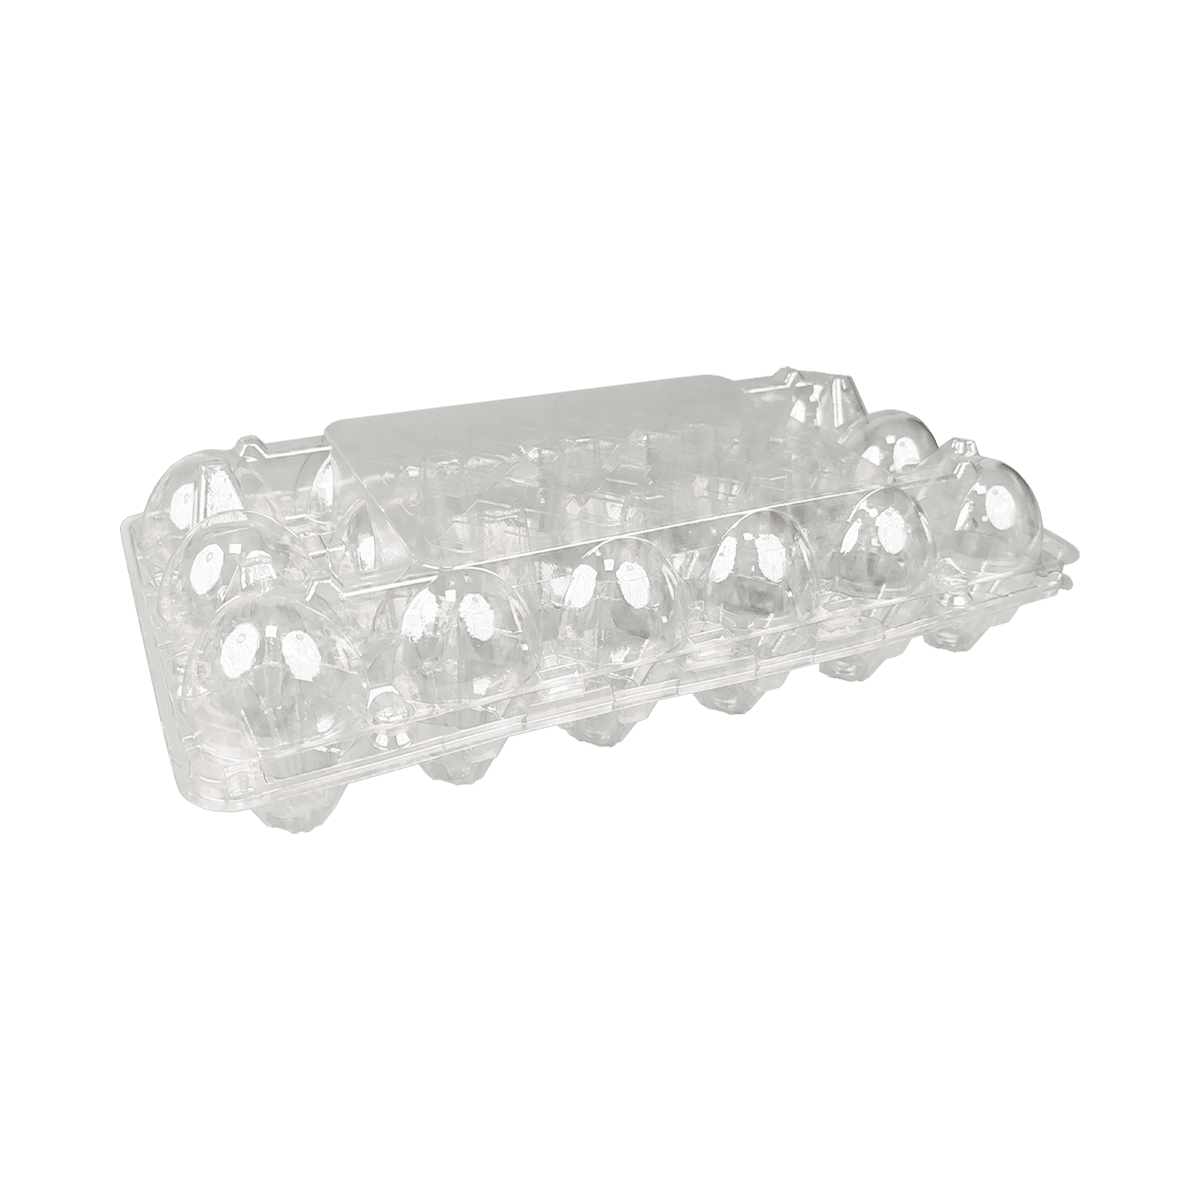 Disposable stackable transparent 18 egg cartons suitable for home refrigerator storage